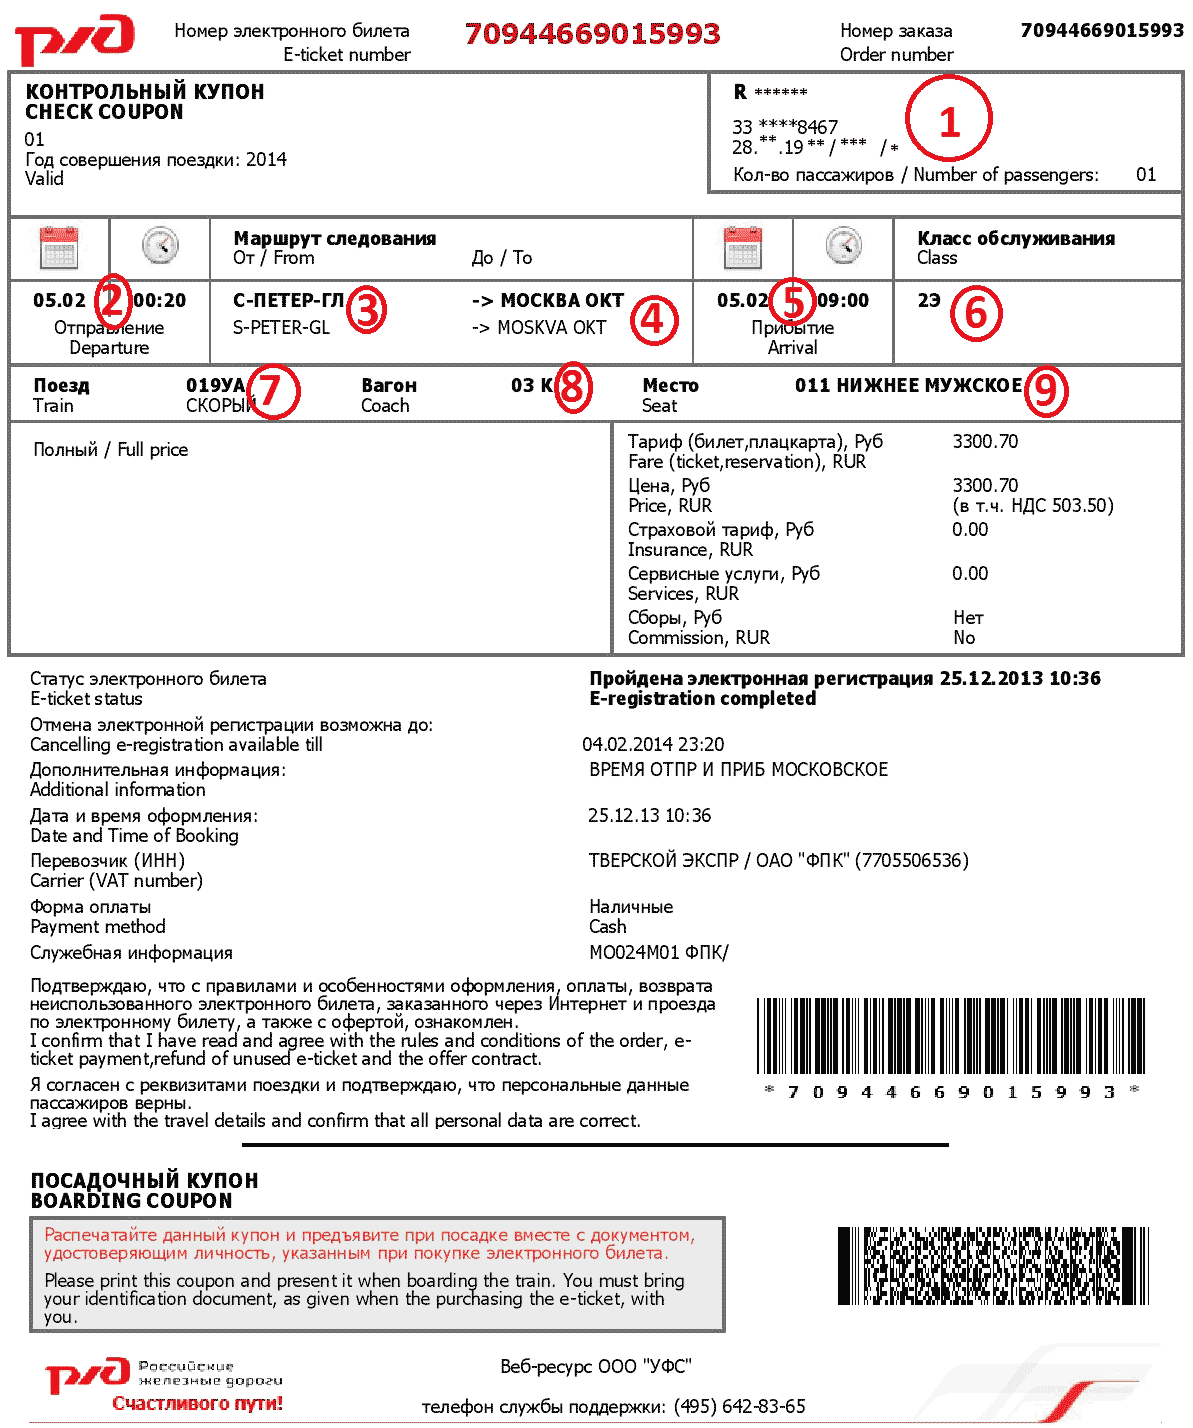 How to read Russian electronic ticket confirmation